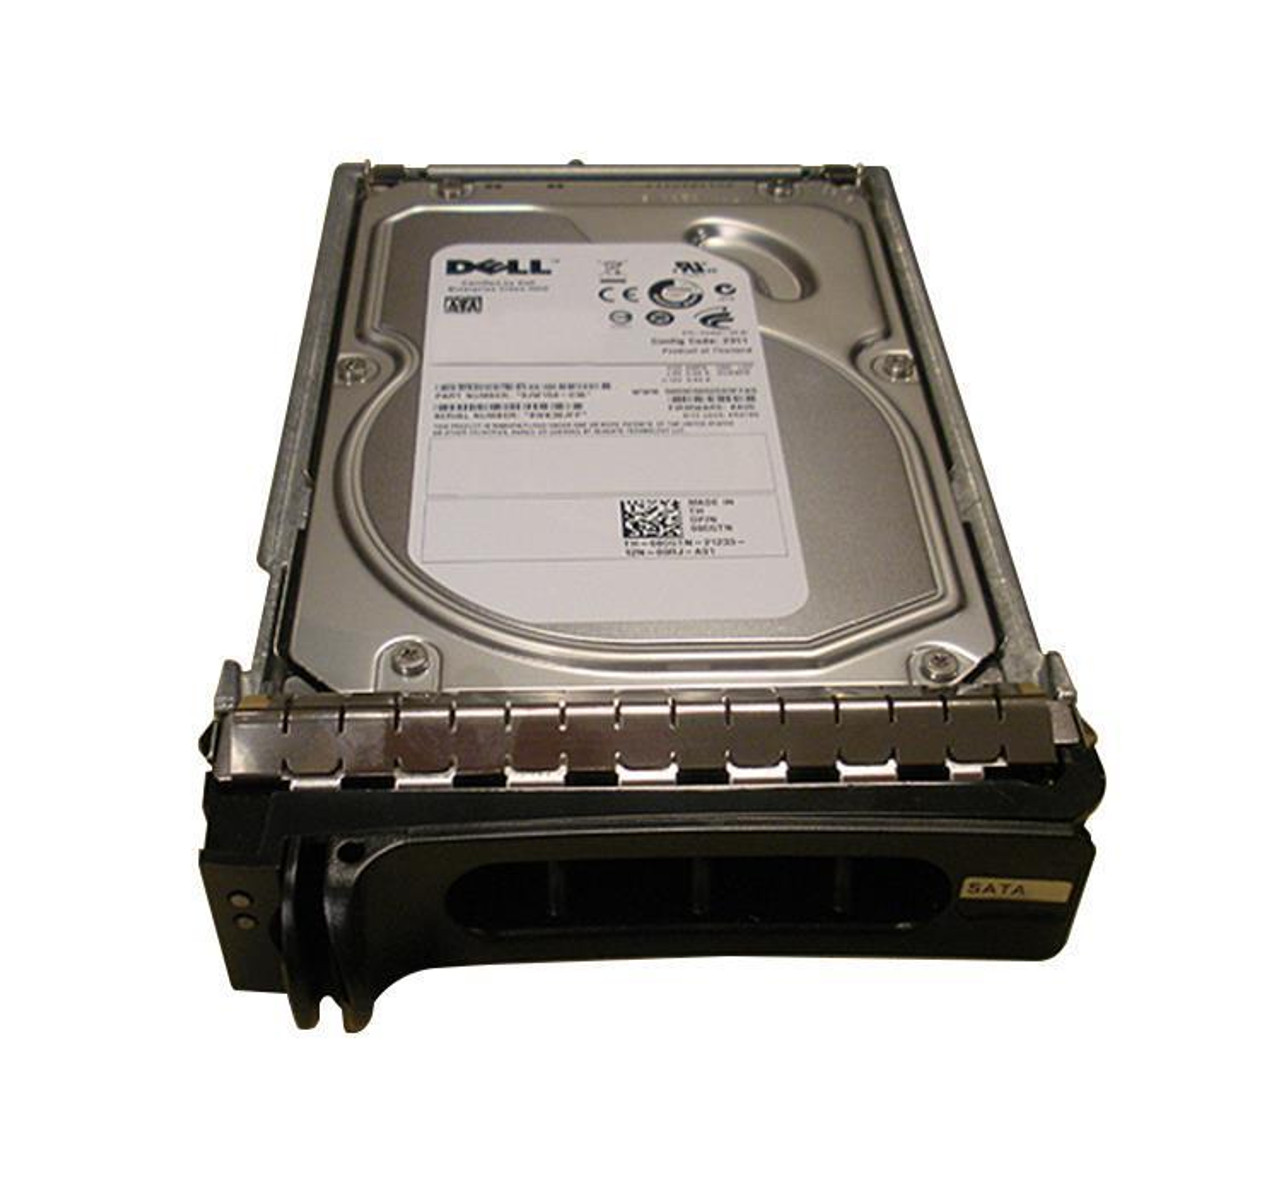 Dell 1TB 7200RPM SATA 3Gbps 32MB Cache 3.5-inch Internal Hard Drive with Tray